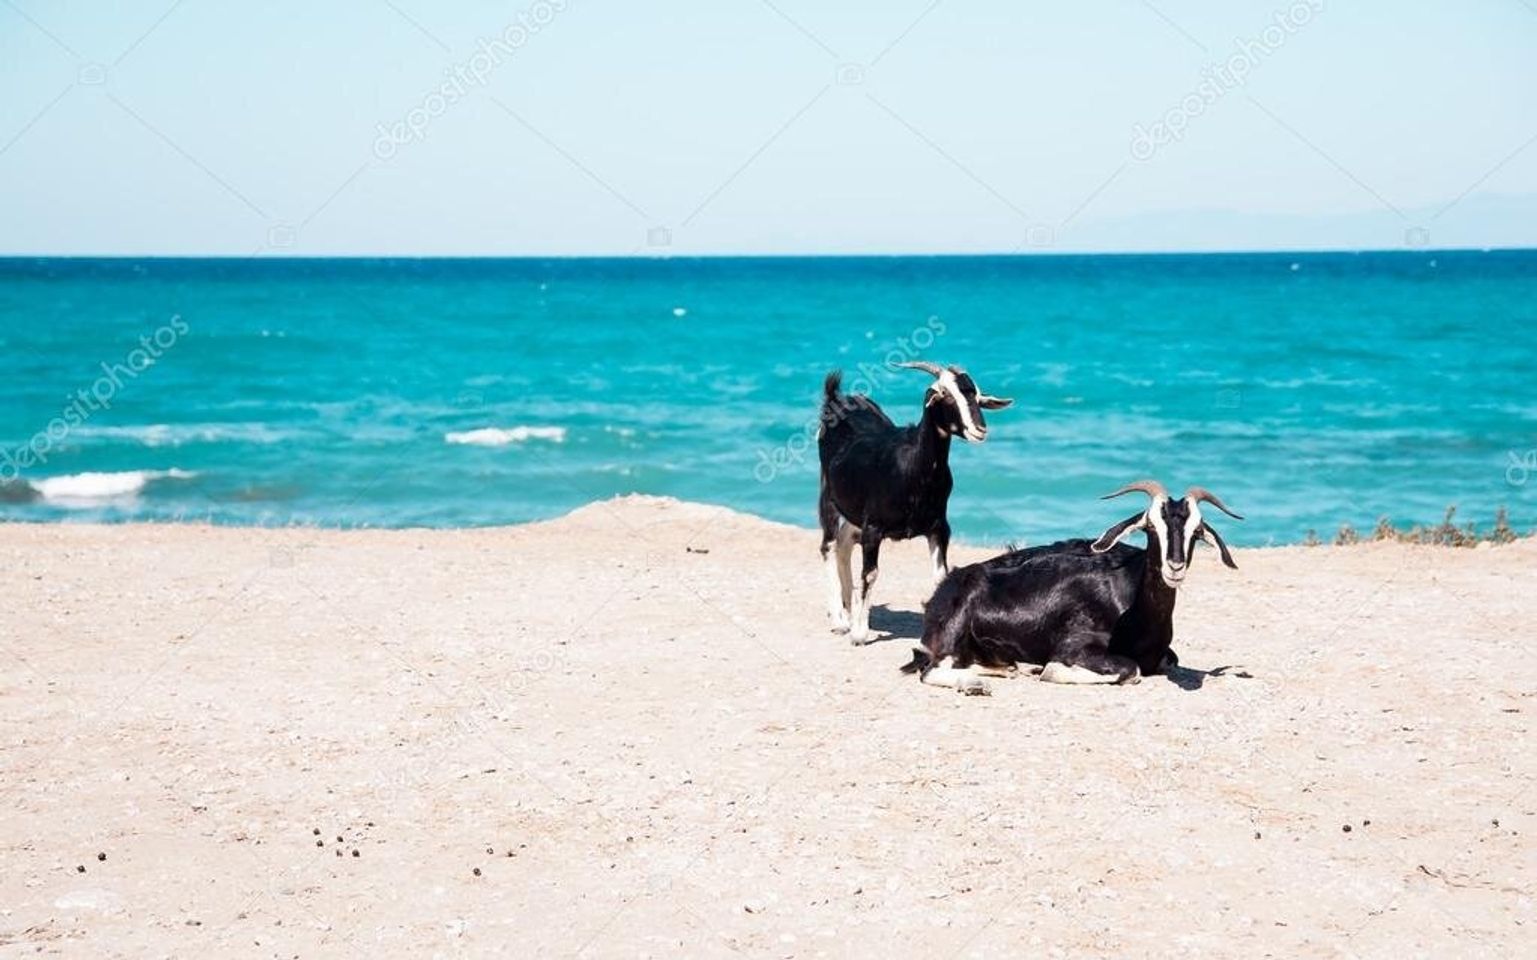 me & my wife enjoying the beach front view before my untimely passing